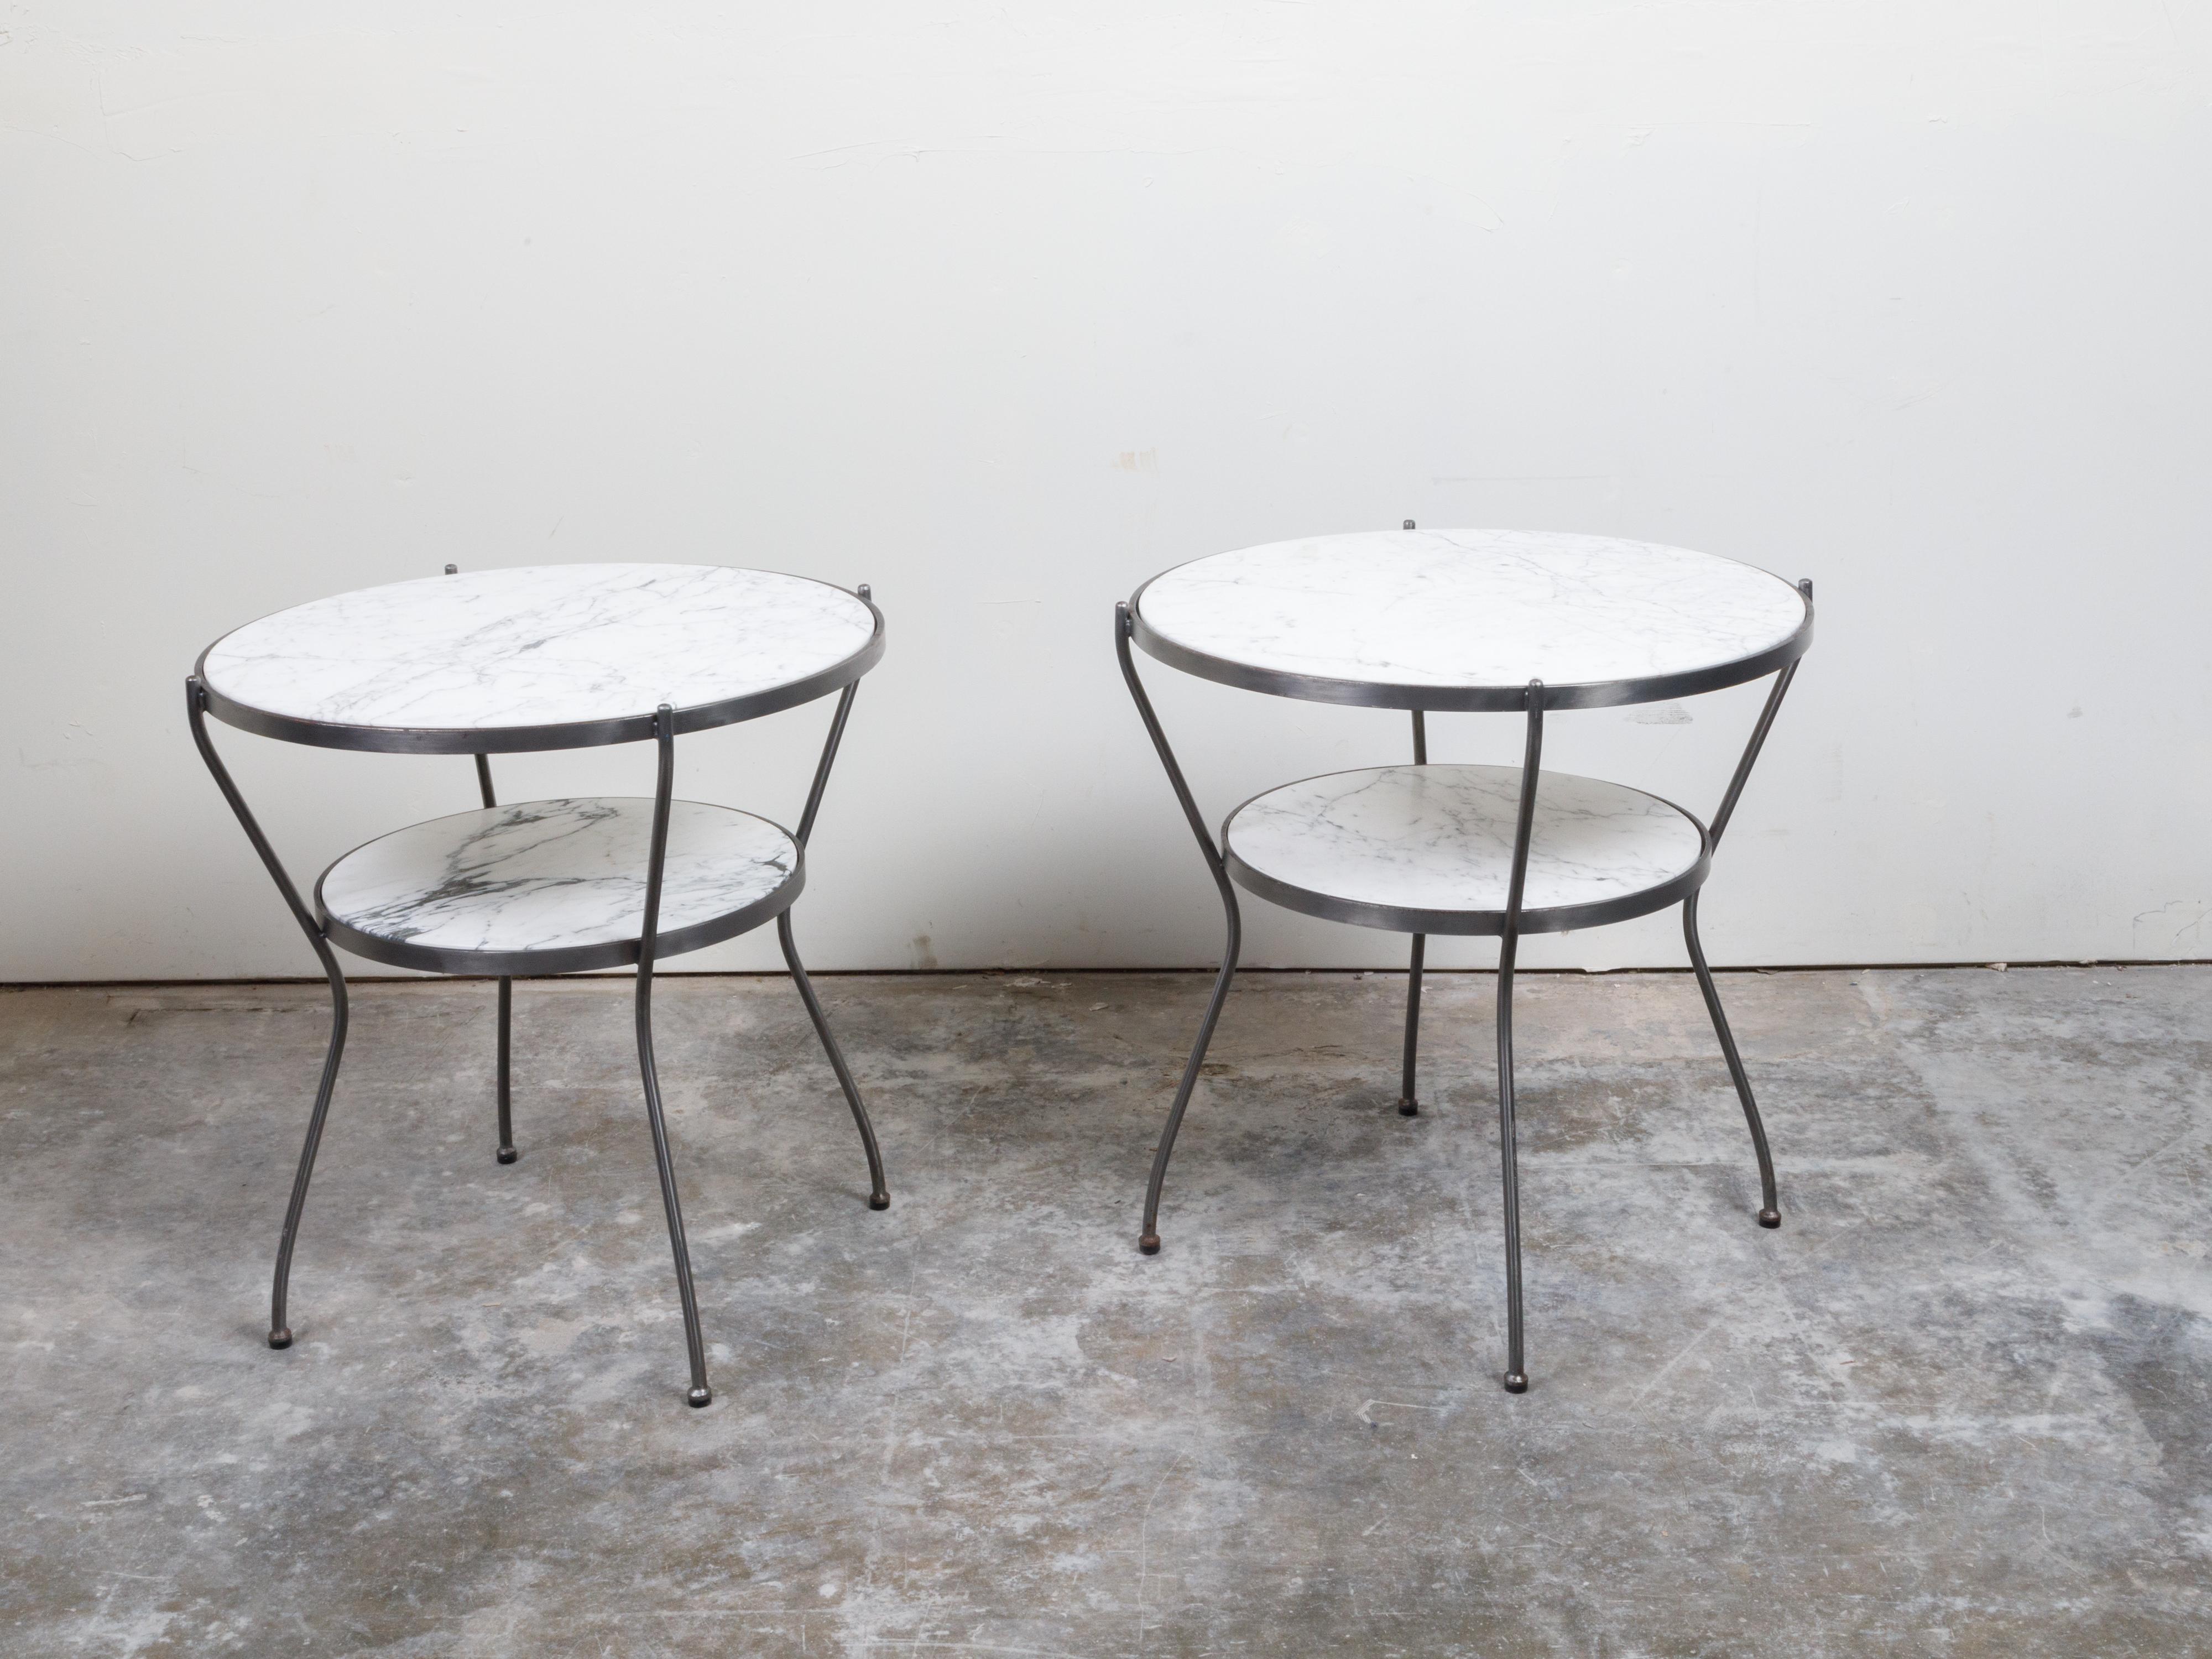 Pair of Italian Midcentury Steel Side Tables with Marble Tops and Shelves For Sale 3